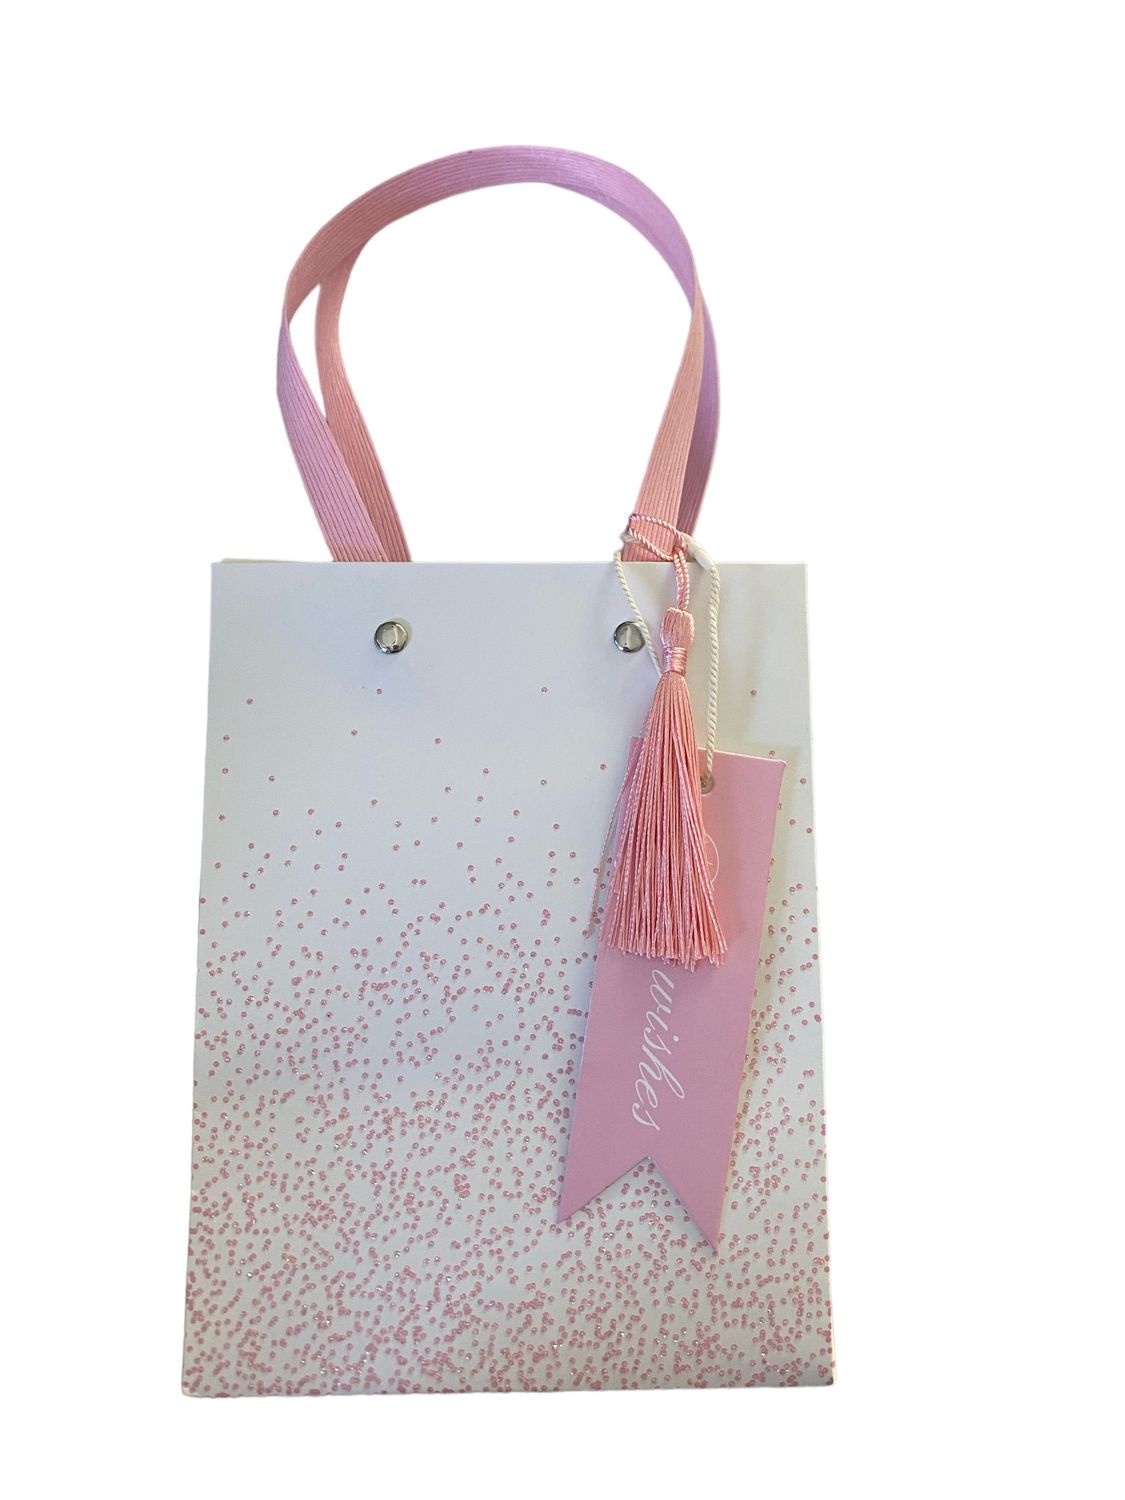 Best Wish White with Pink Glitter Small Gift Bag PK3 (R13.50 Each)